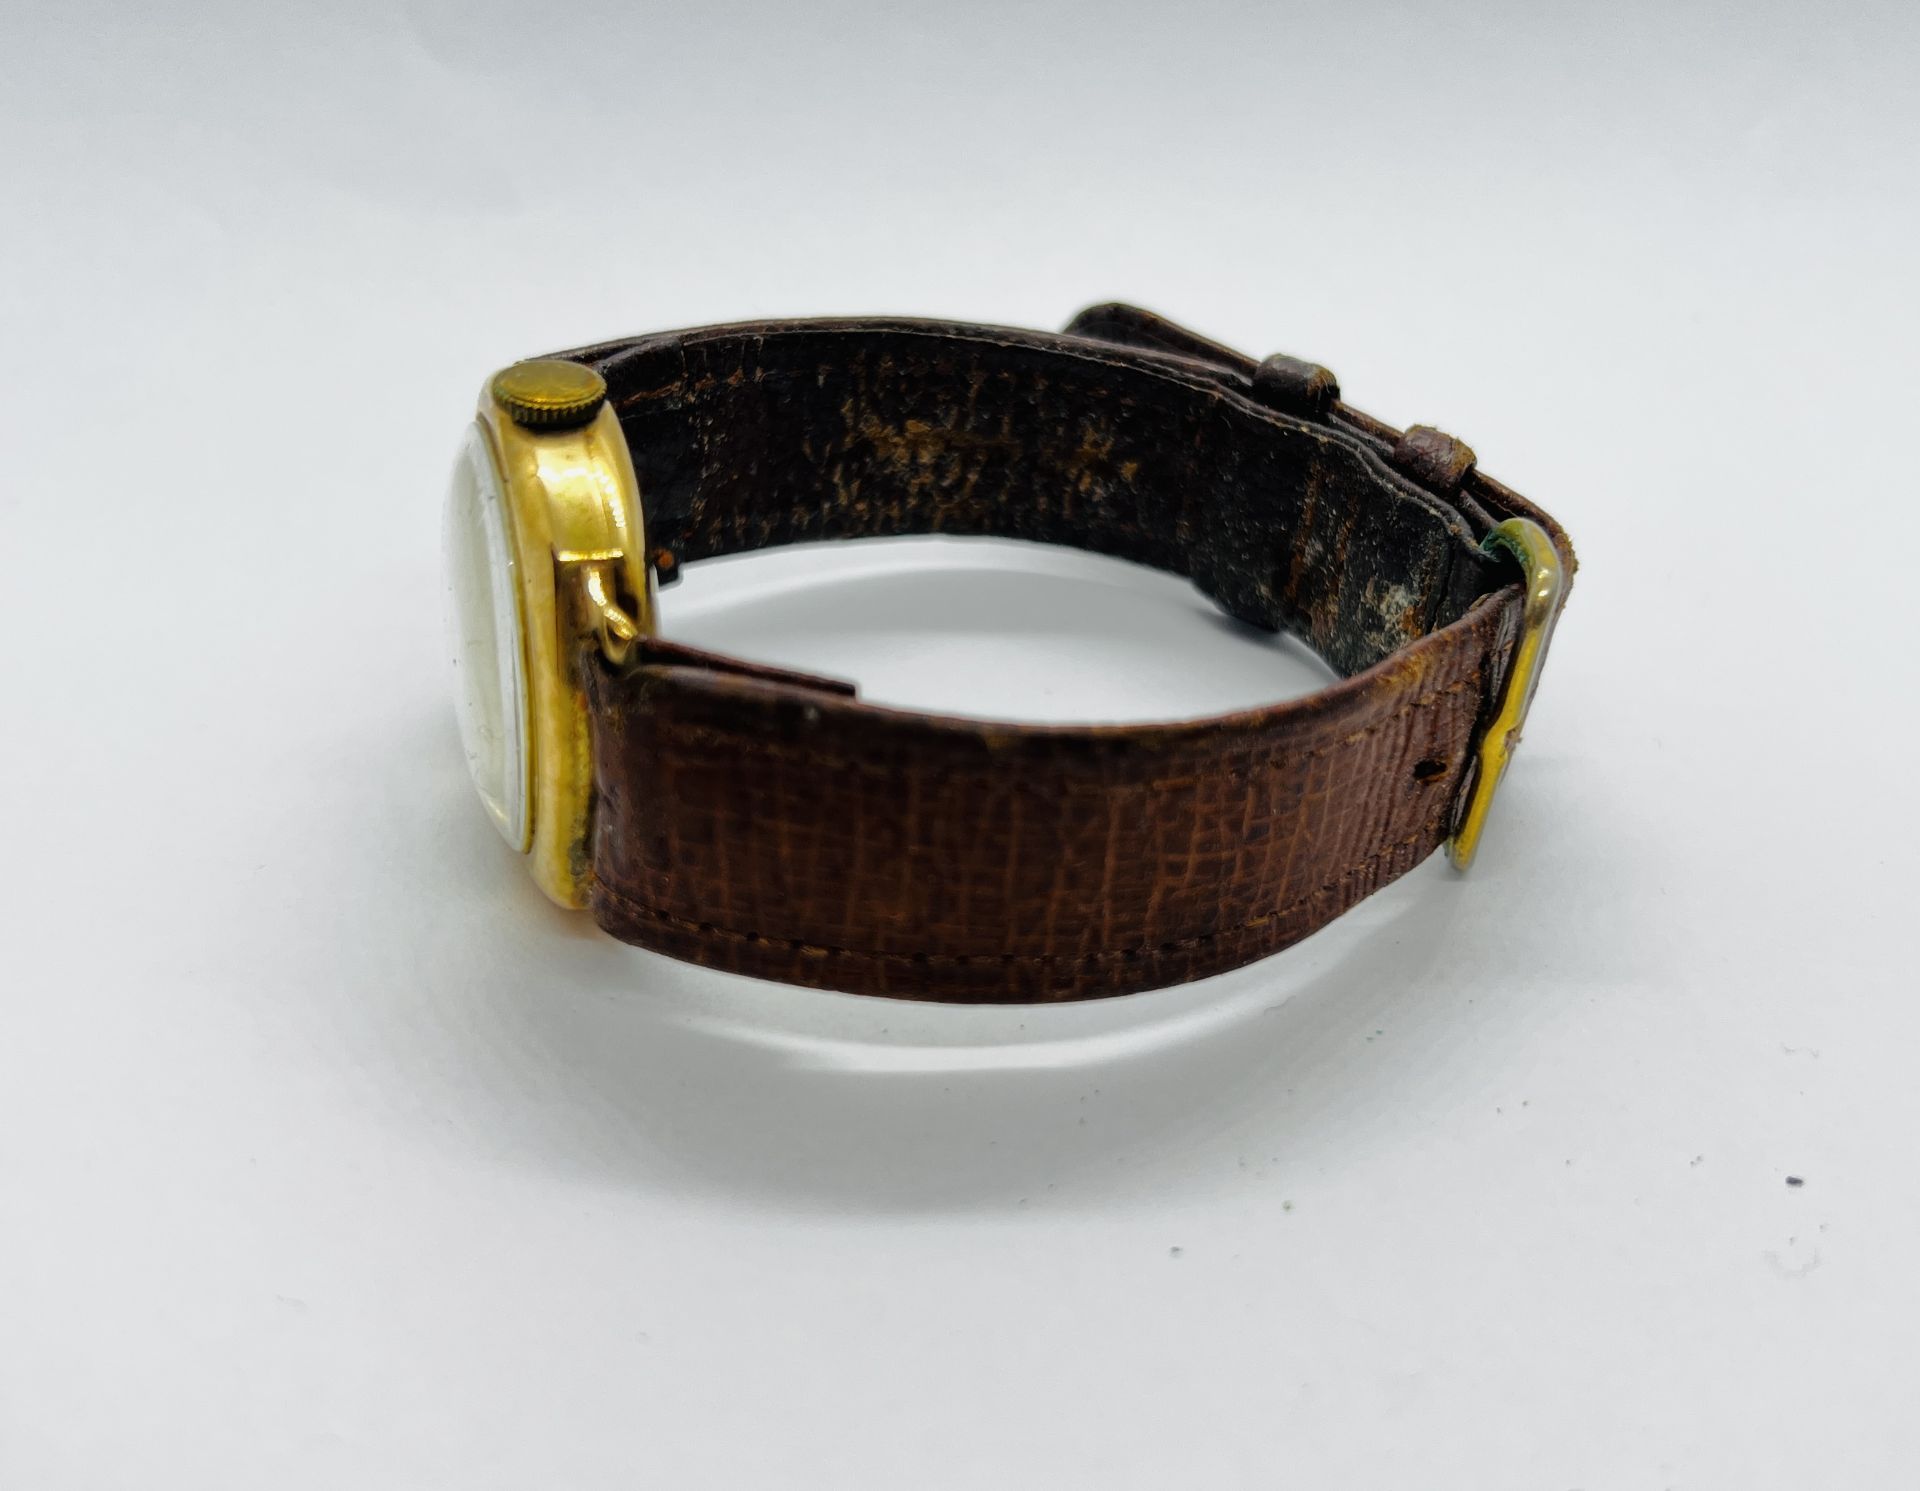 A VINTAGE 9CT GOLD CASED WRIST WATCH MARKED HERBERT ....... LTD MAGNO LUX ON A BROWN LEATHER STRAP. - Image 5 of 7